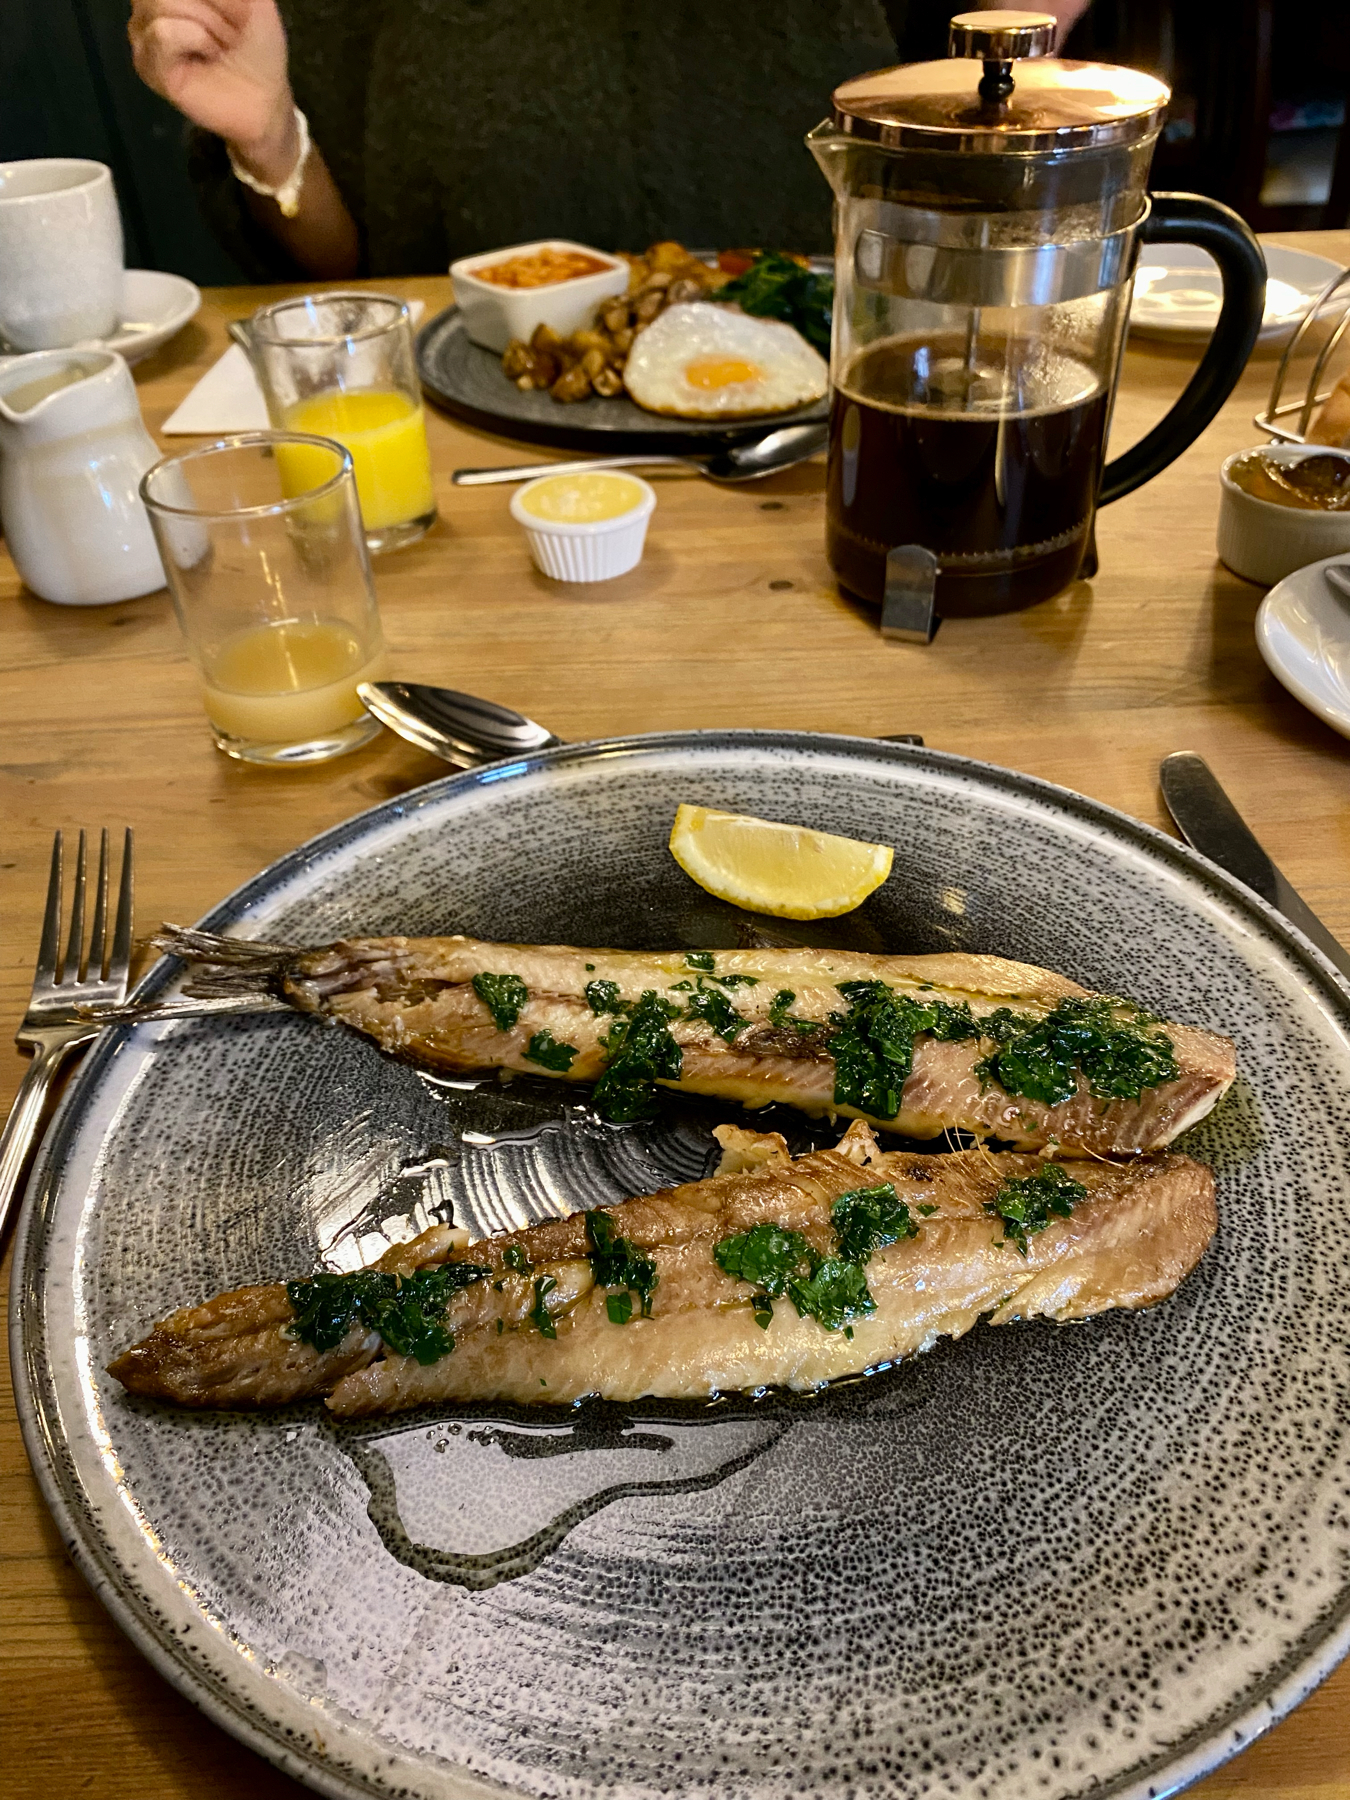 A breakfast table with two kipper fillets garnished with herbs on a plate, accompanied by a French press with coffee, orange juice, and another plate with fried eggs, spinach, and beans in the background.